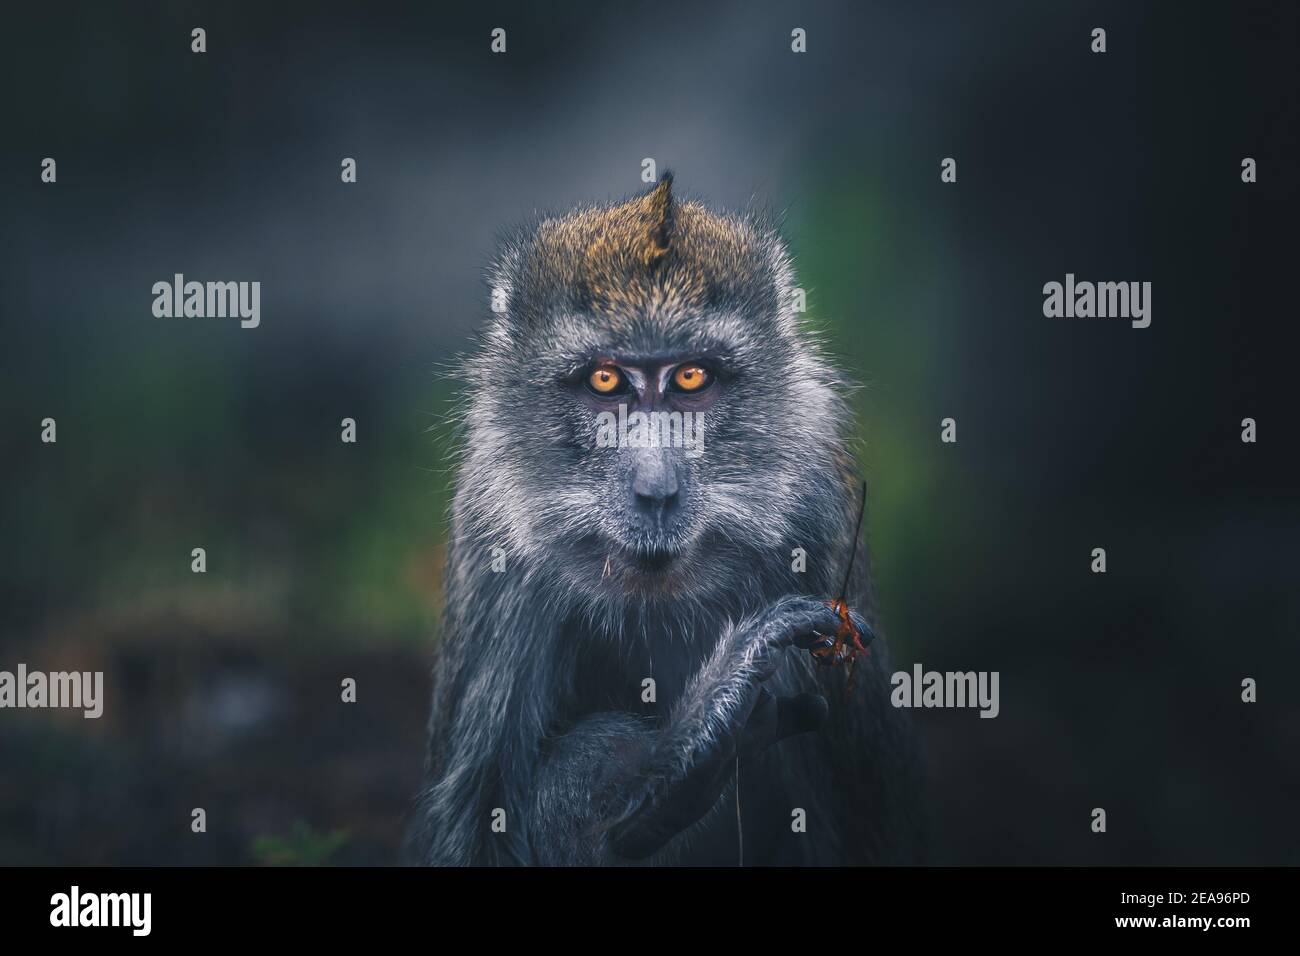 A threatening-looking monkey protecting its leaf in a wildlife park near Freiburg Stock Photo